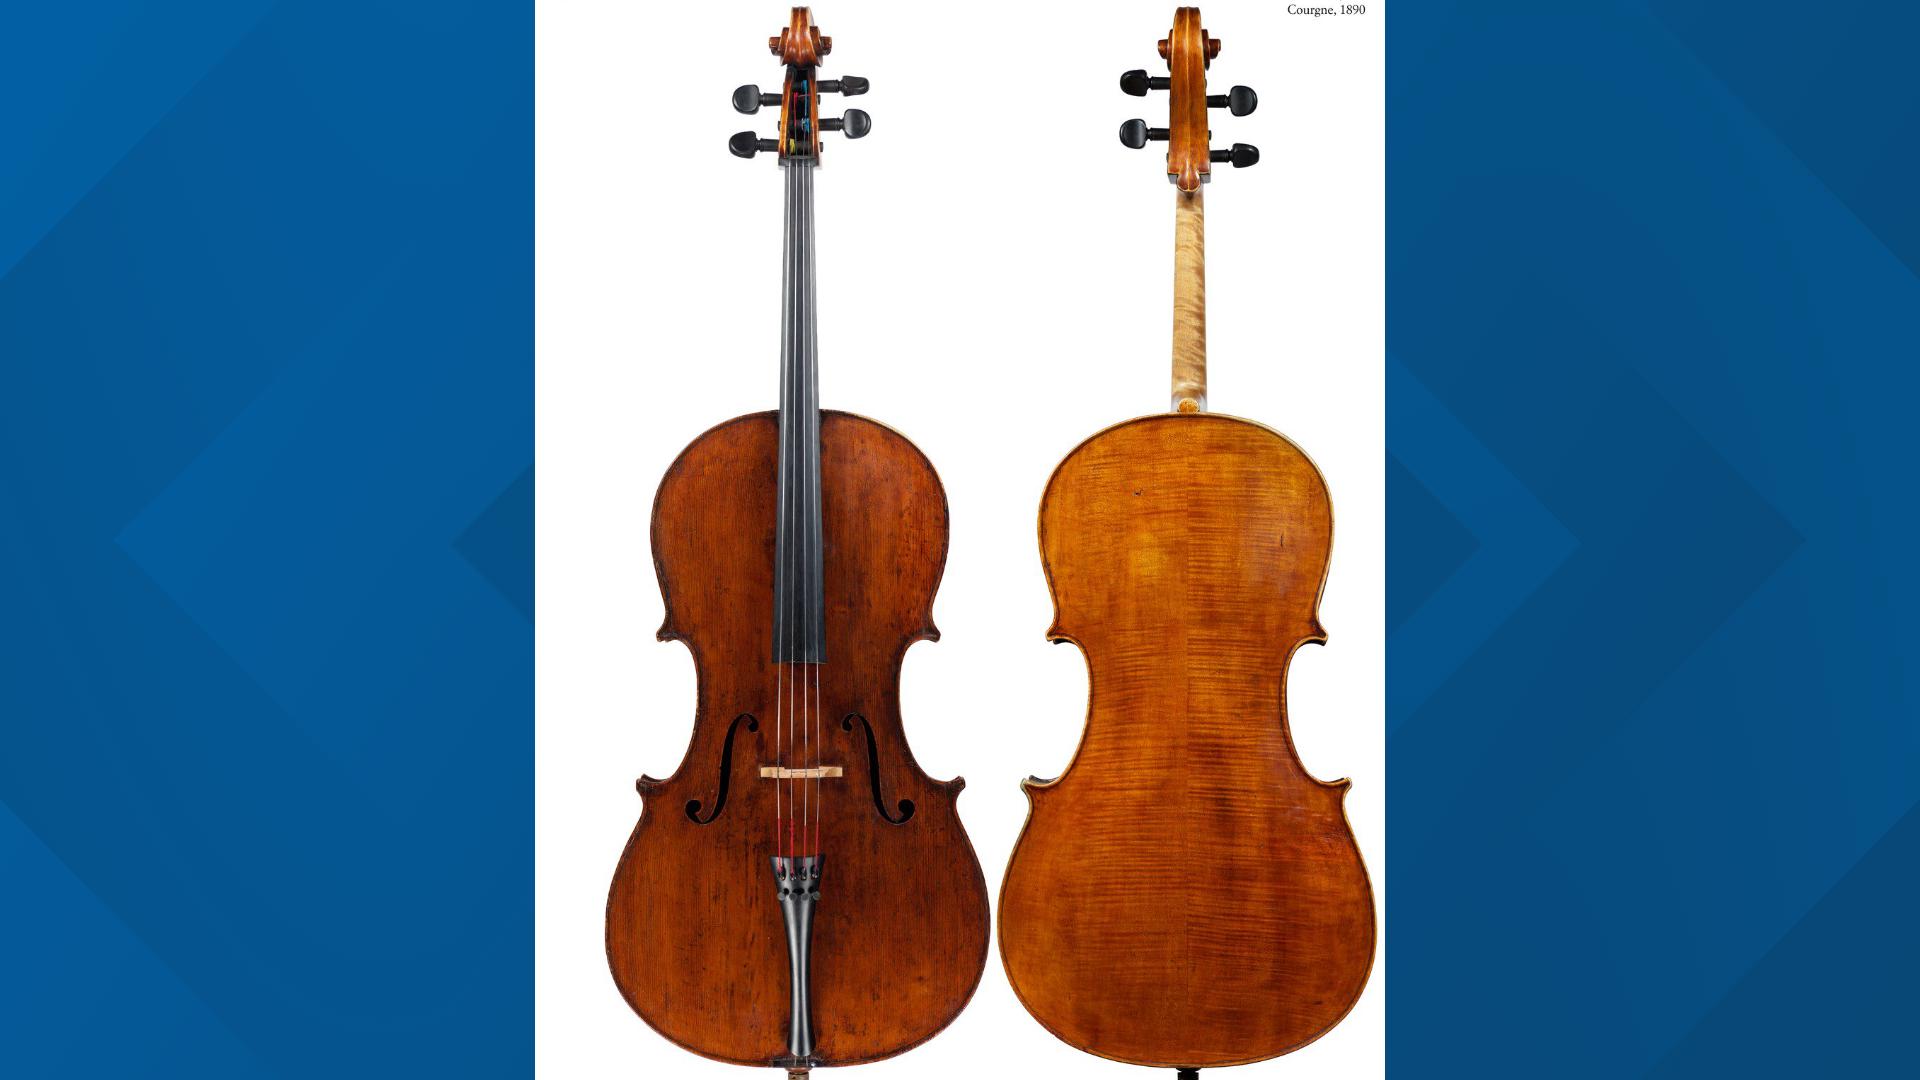 An 1890 Enrico Marchetti cello with a blue and black carbon fiber case was last seen on Saturday. Police said the musical equipment is worth about $250,000.